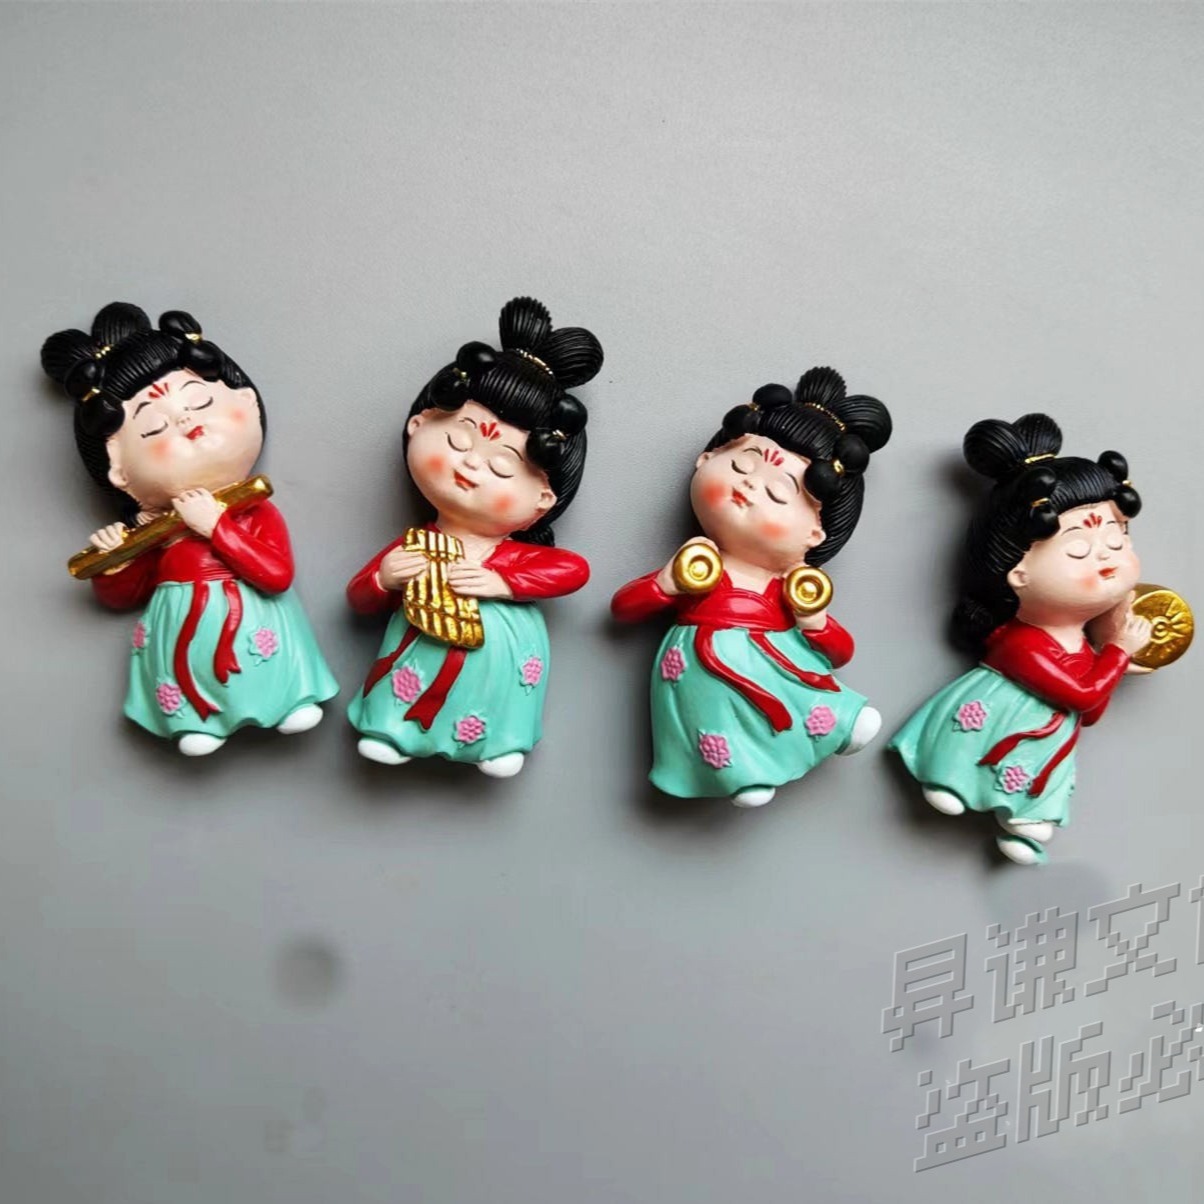 luoyang tang palace night banquet ladies cultural and creative music resin refrigerator magnet decoration factory direct supply cultural and creative resin refrigerator magnet